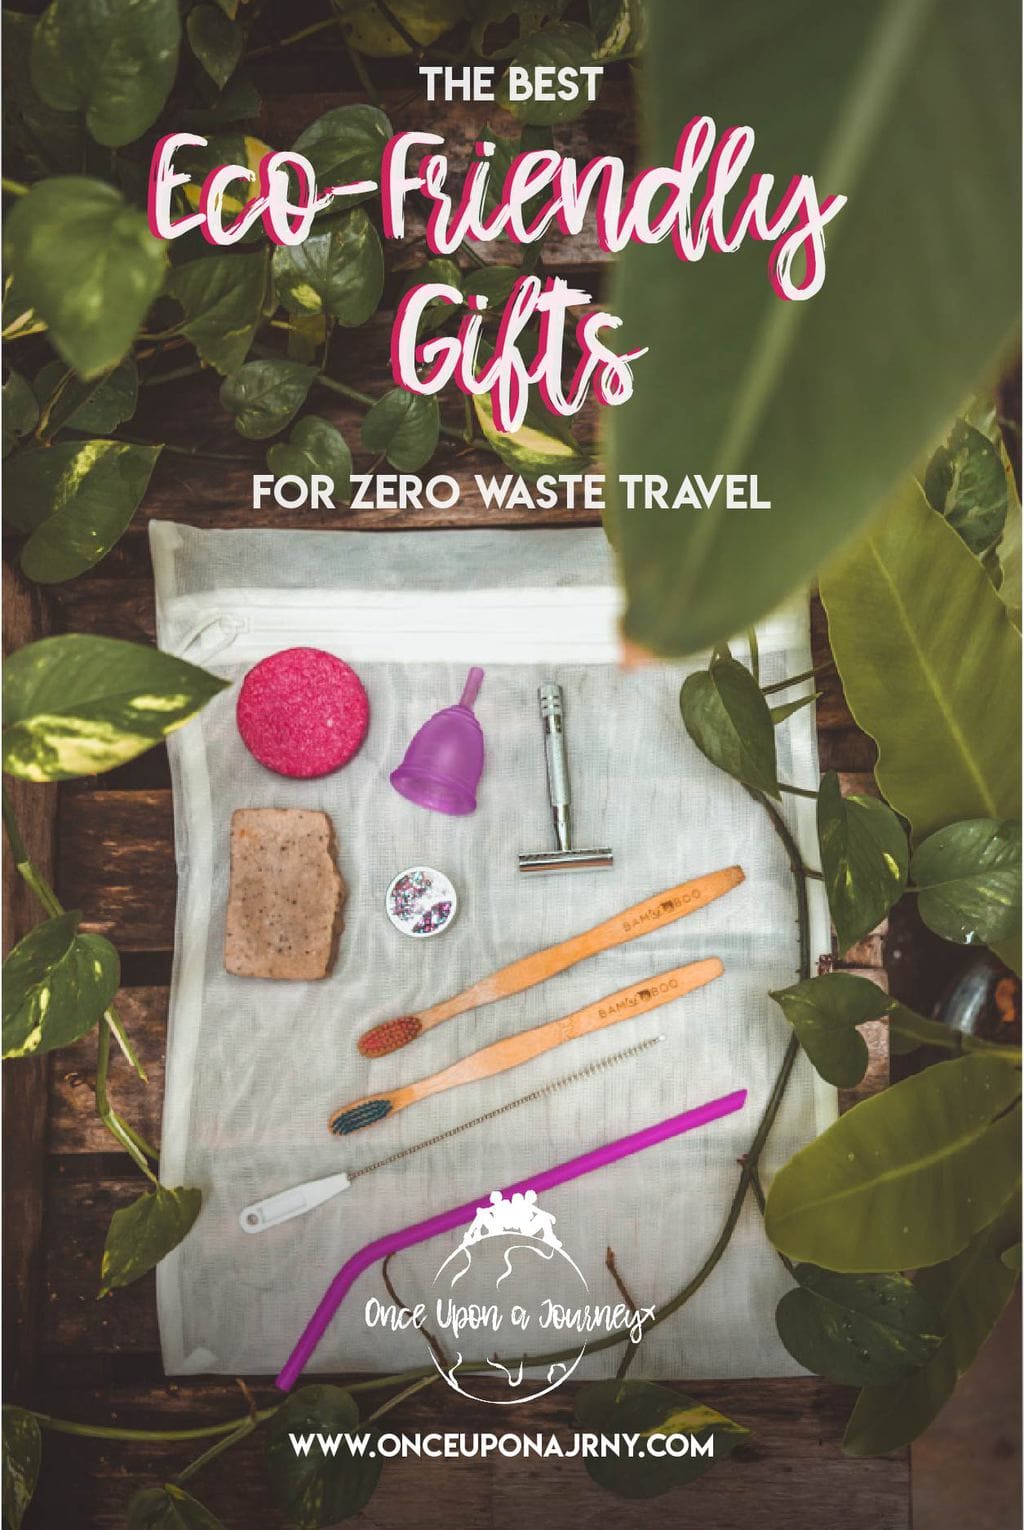 The Best Eco-Friendly Gifts For ZERO Waste Travel | Once Upon A Journey LGBT Travel Blog #sustainabletravel #ecofriendly #gifts #travelproducts #environment #zerowaste #green